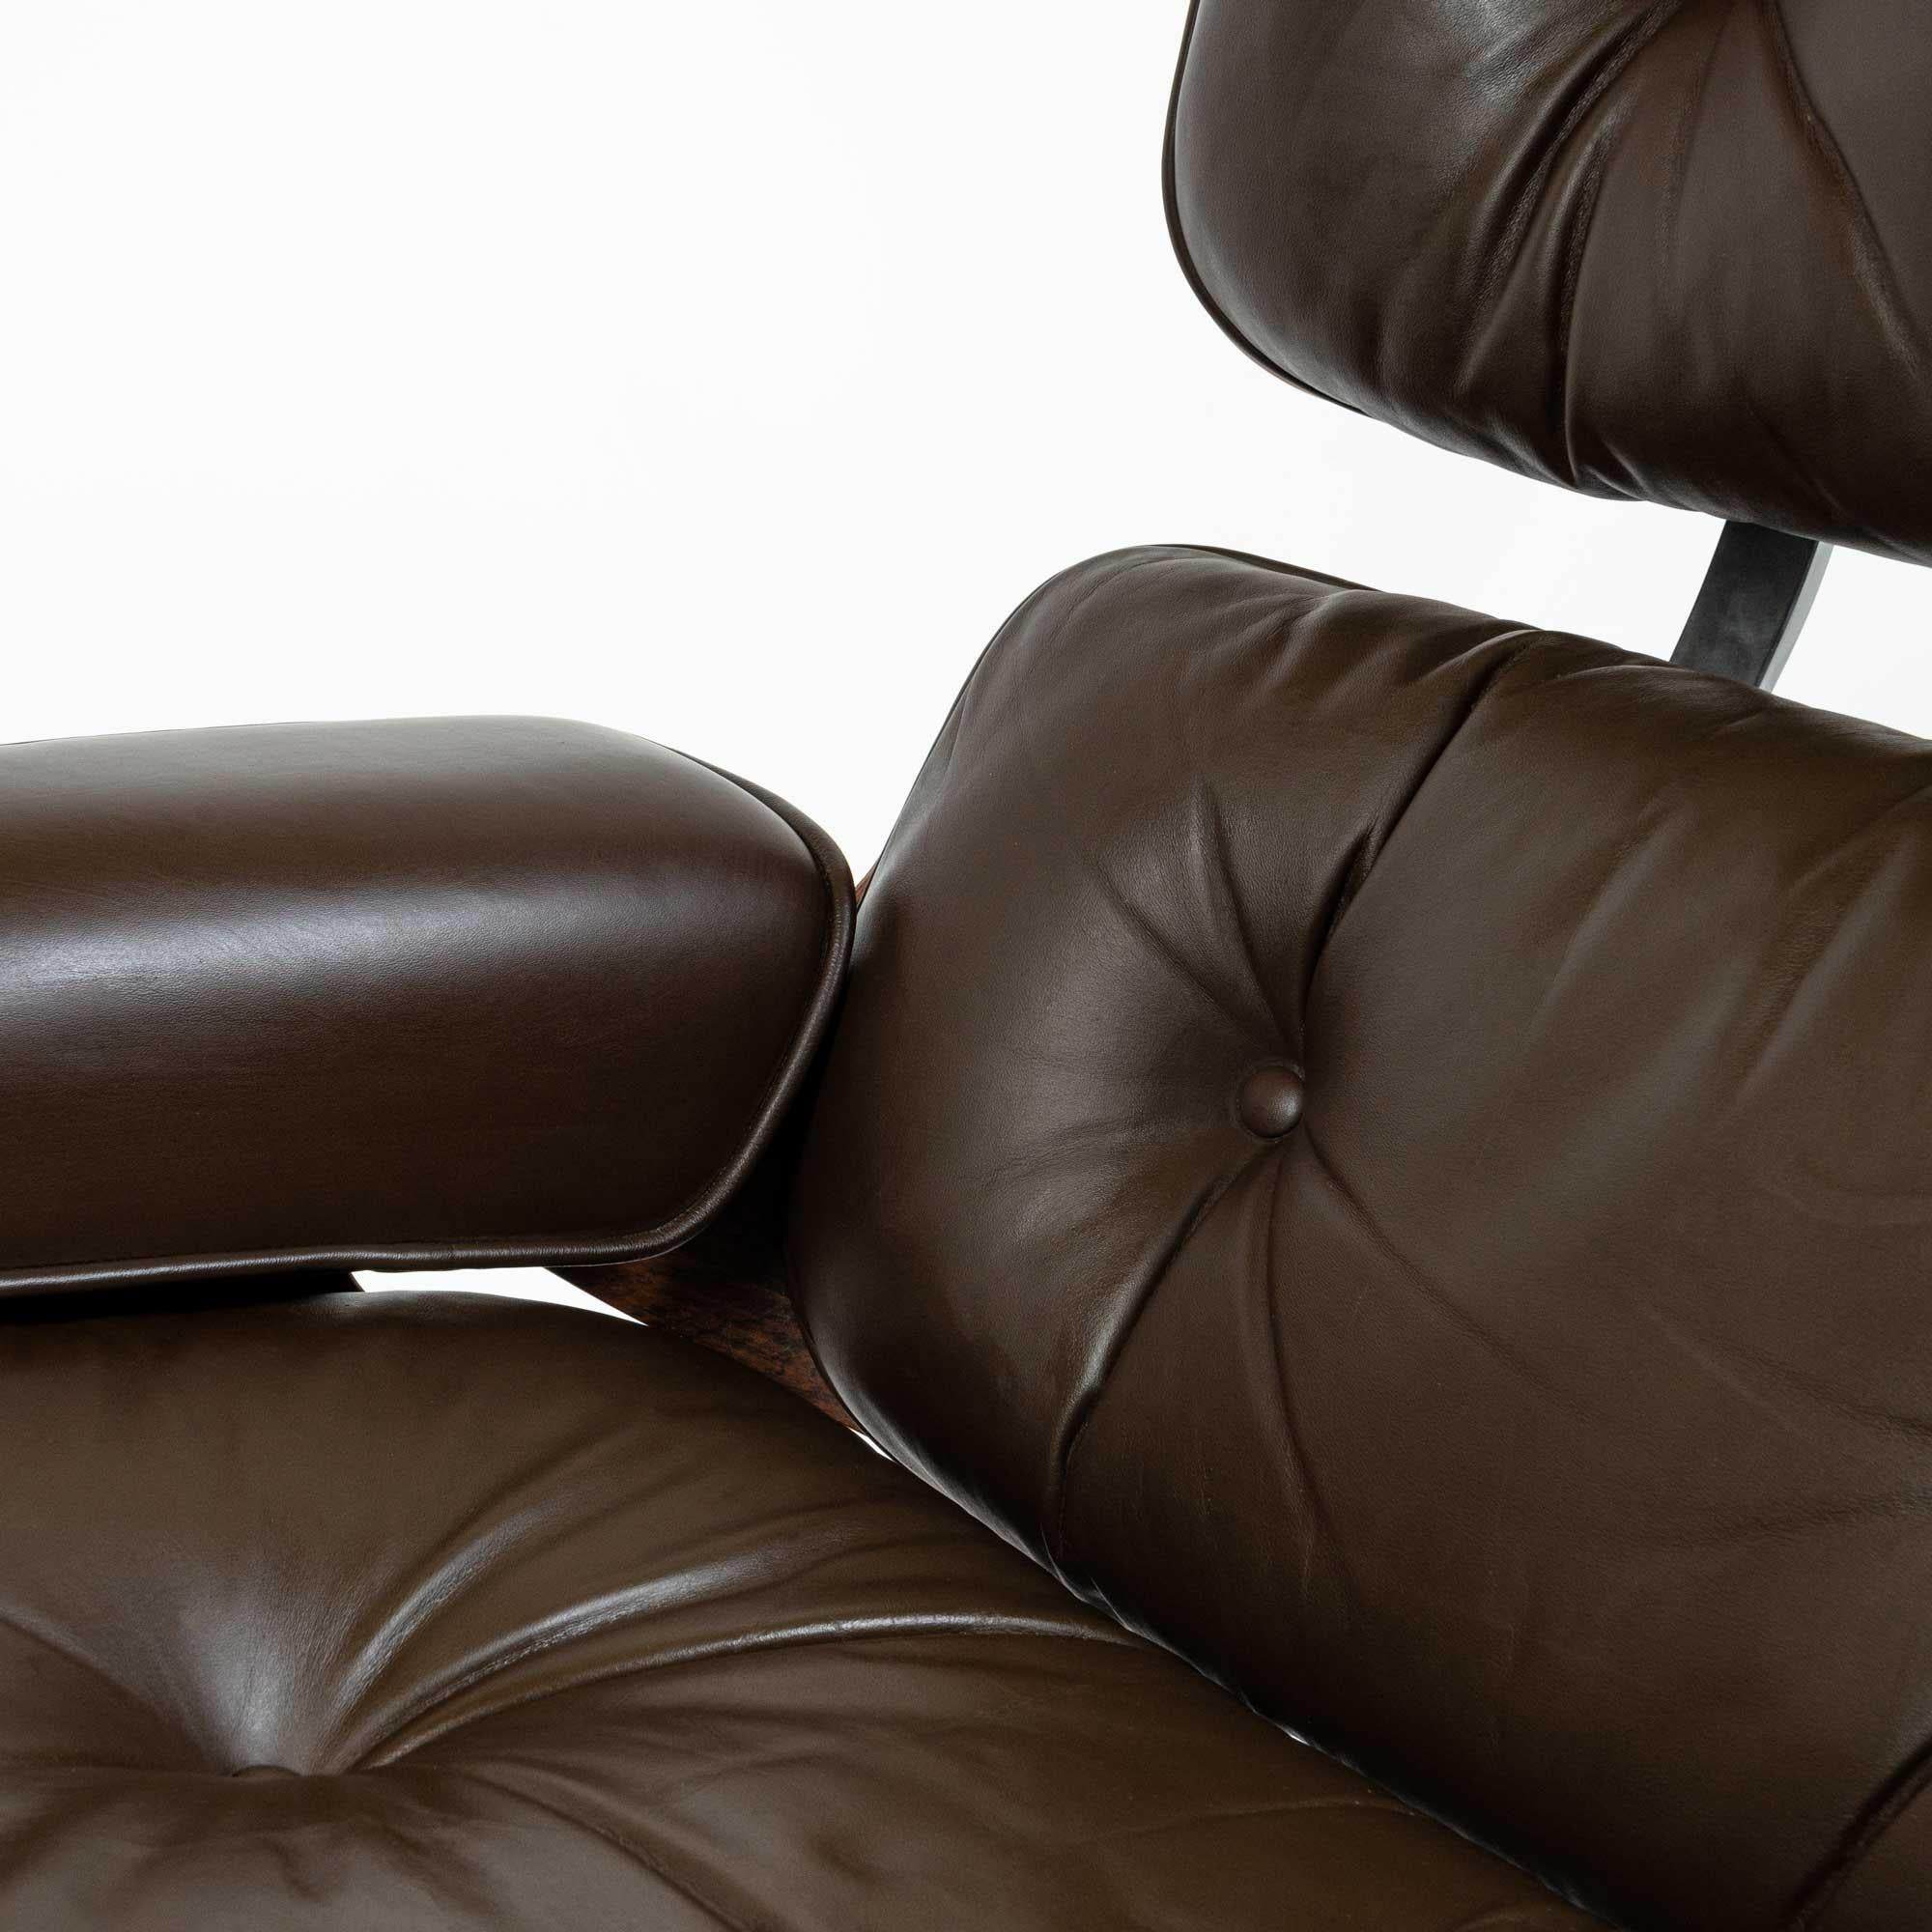 3rd Gen Eames Lounge Chair 670-671 in Original Chocolate Leather For Sale 4